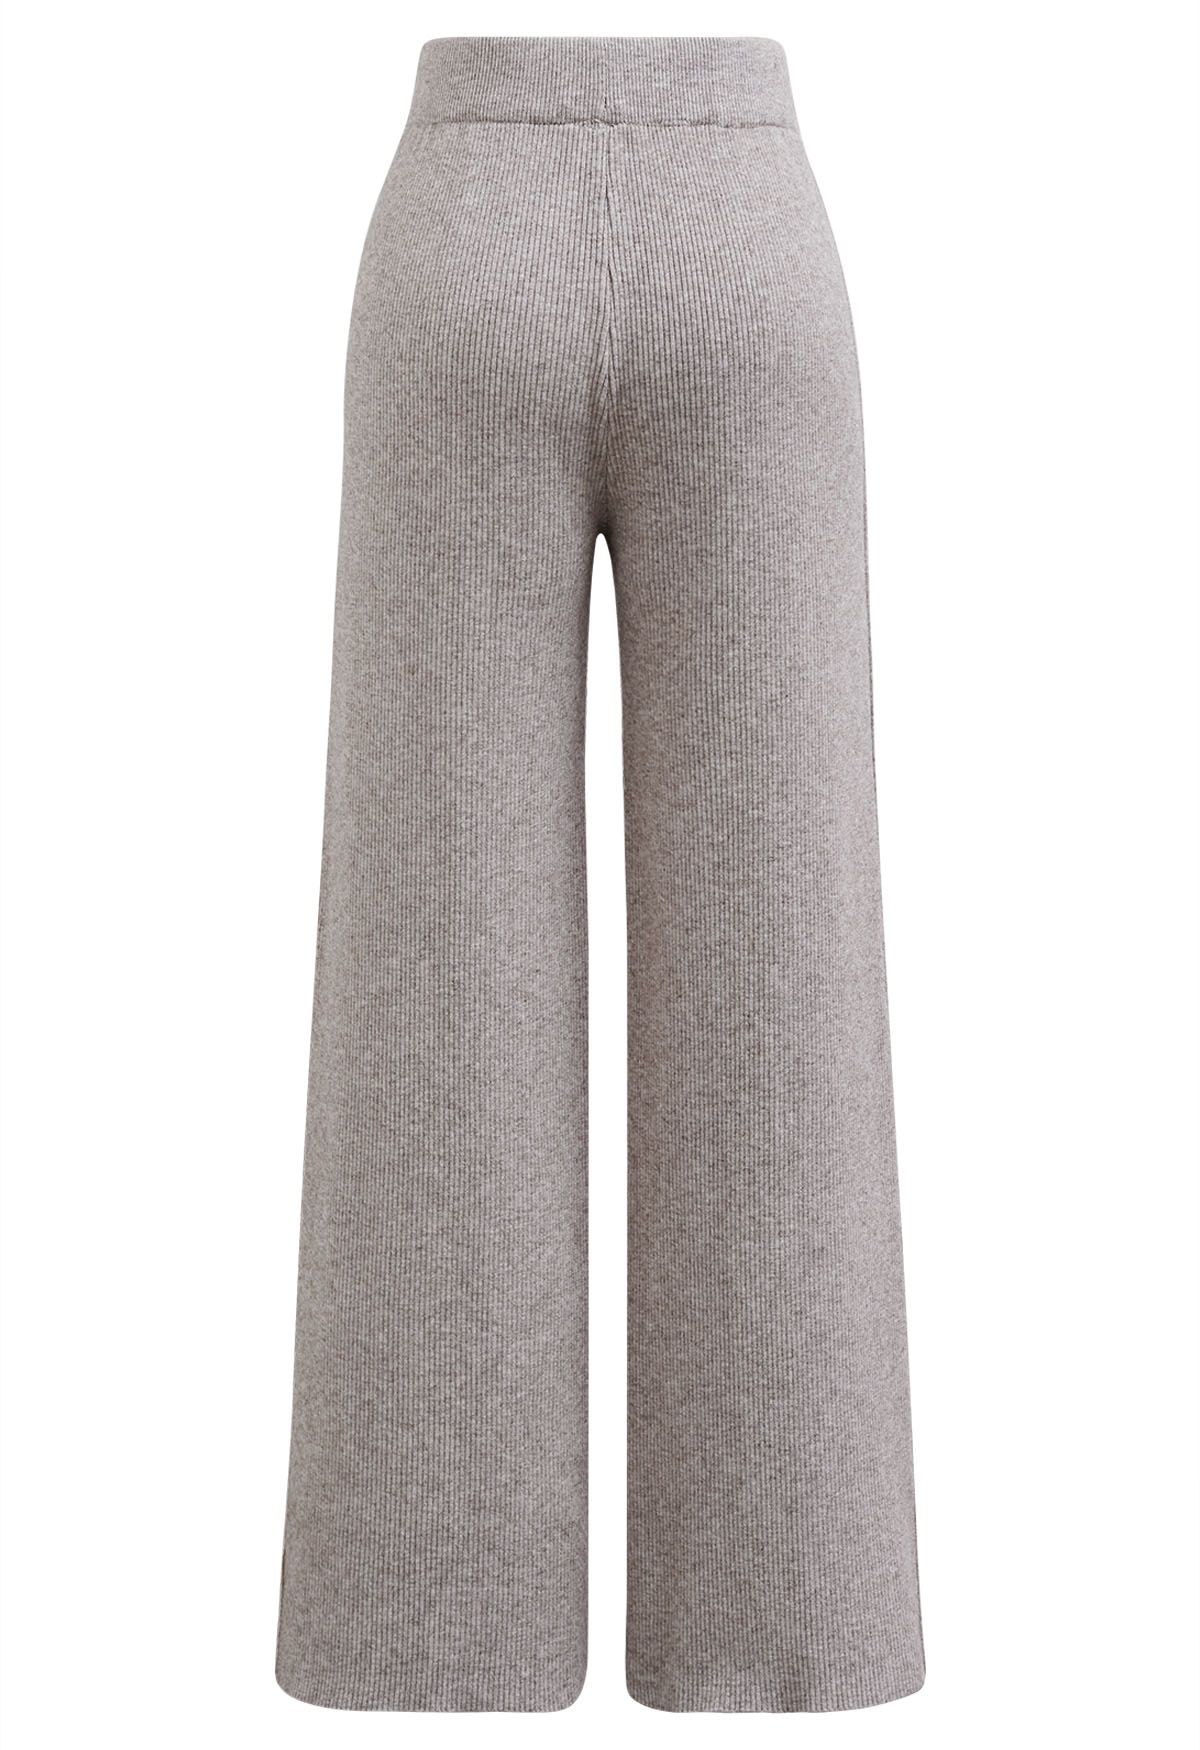 Drawstring Waist Side Slit Knit Pants in Taupe - Retro, Indie and ...